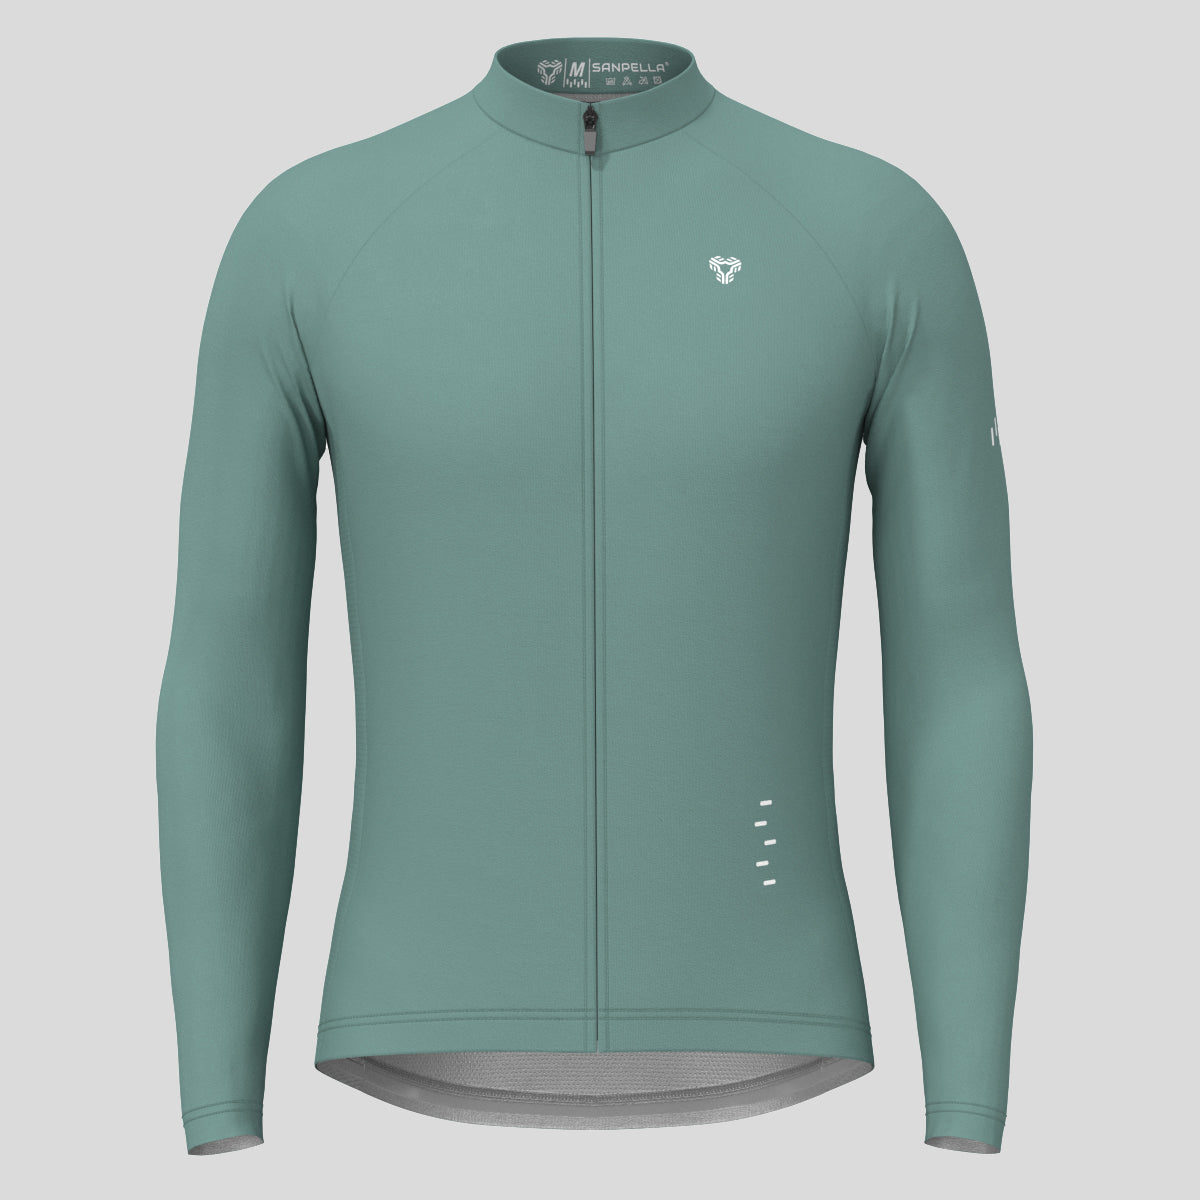 Men's Minimal Solid LS Cycling Jersey - Sage